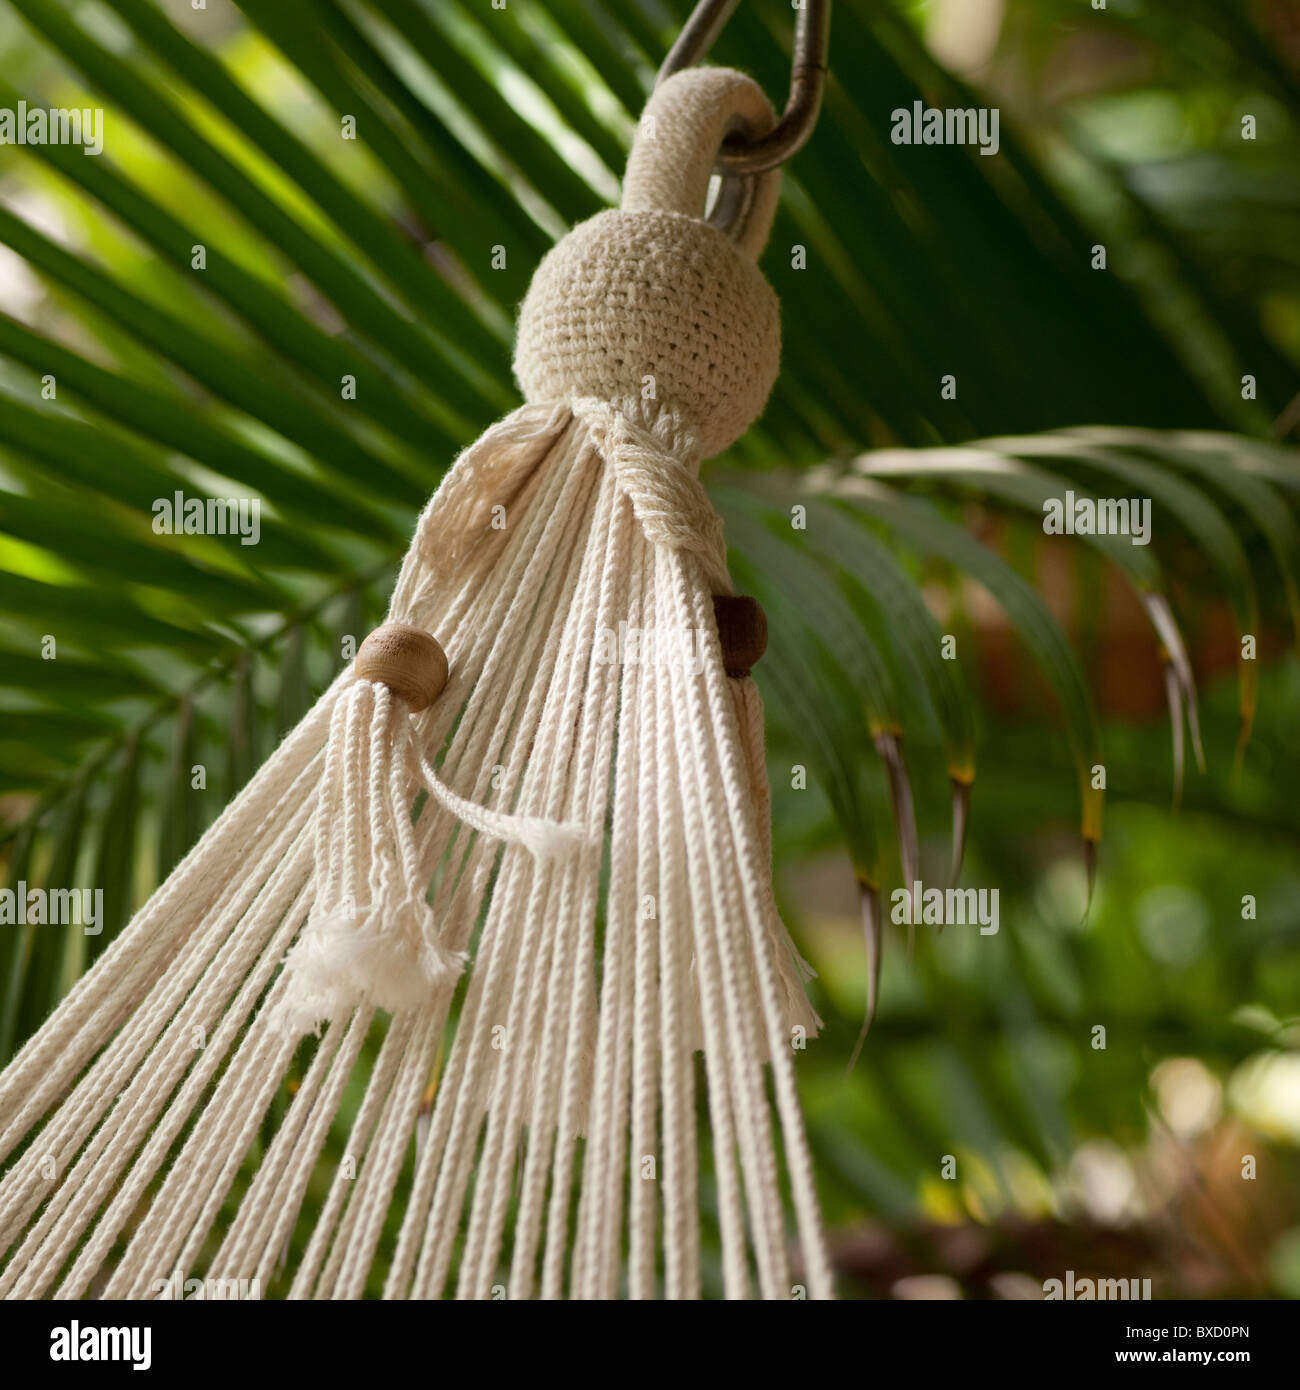 End cords of a hanging hammock in Costa Rica Stock Photo